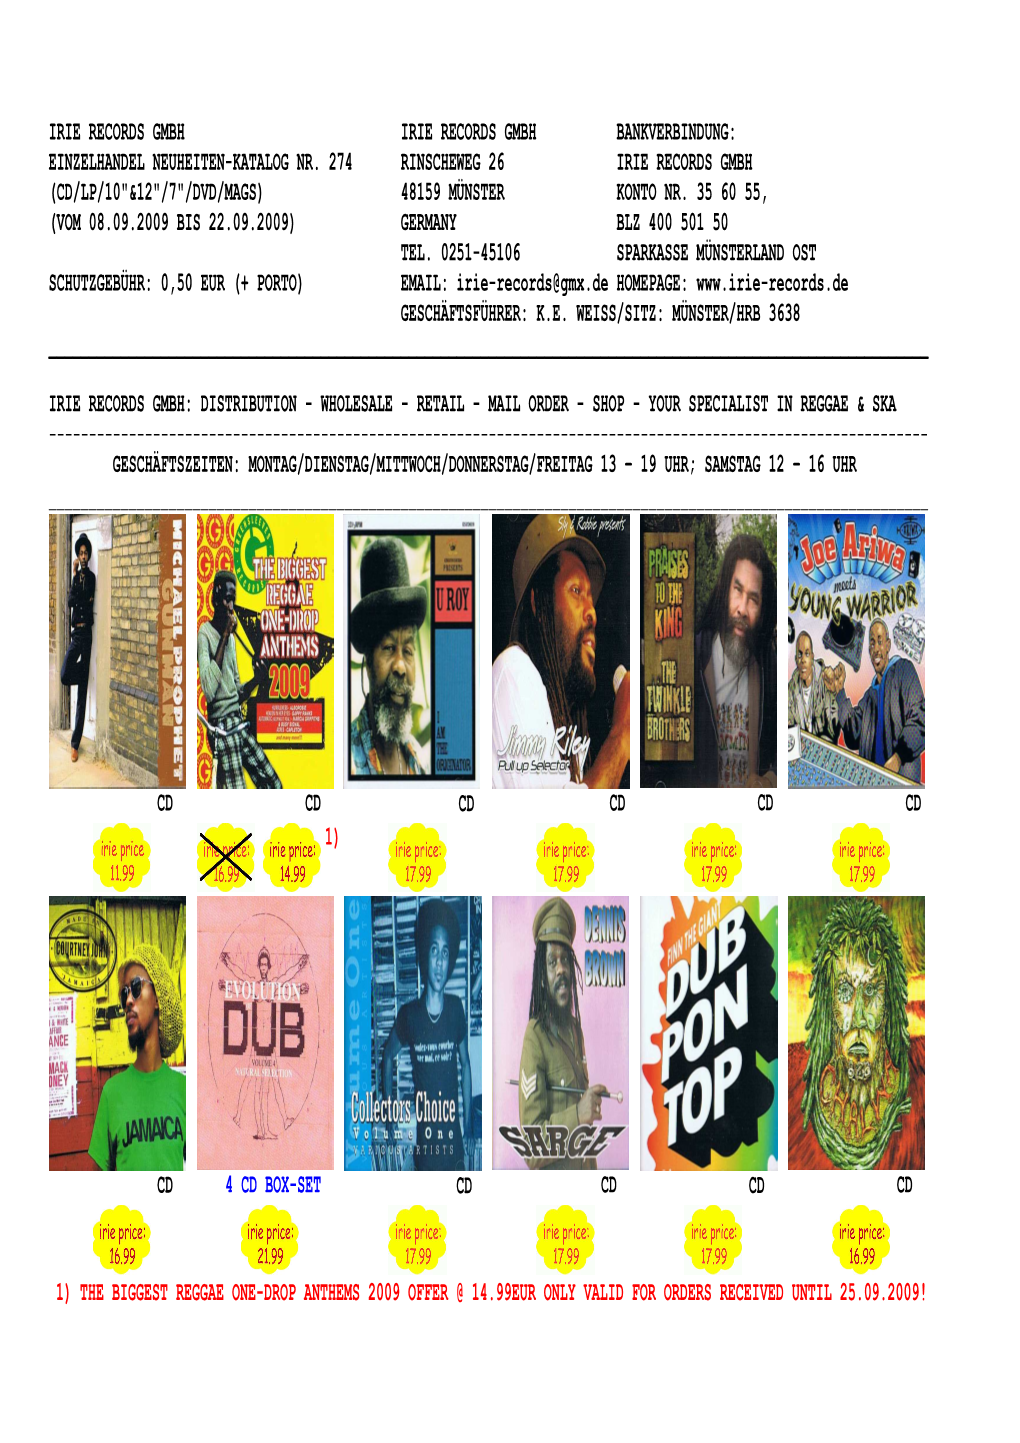 IRIE RECORDS New Release Catalogue 09-09 #2